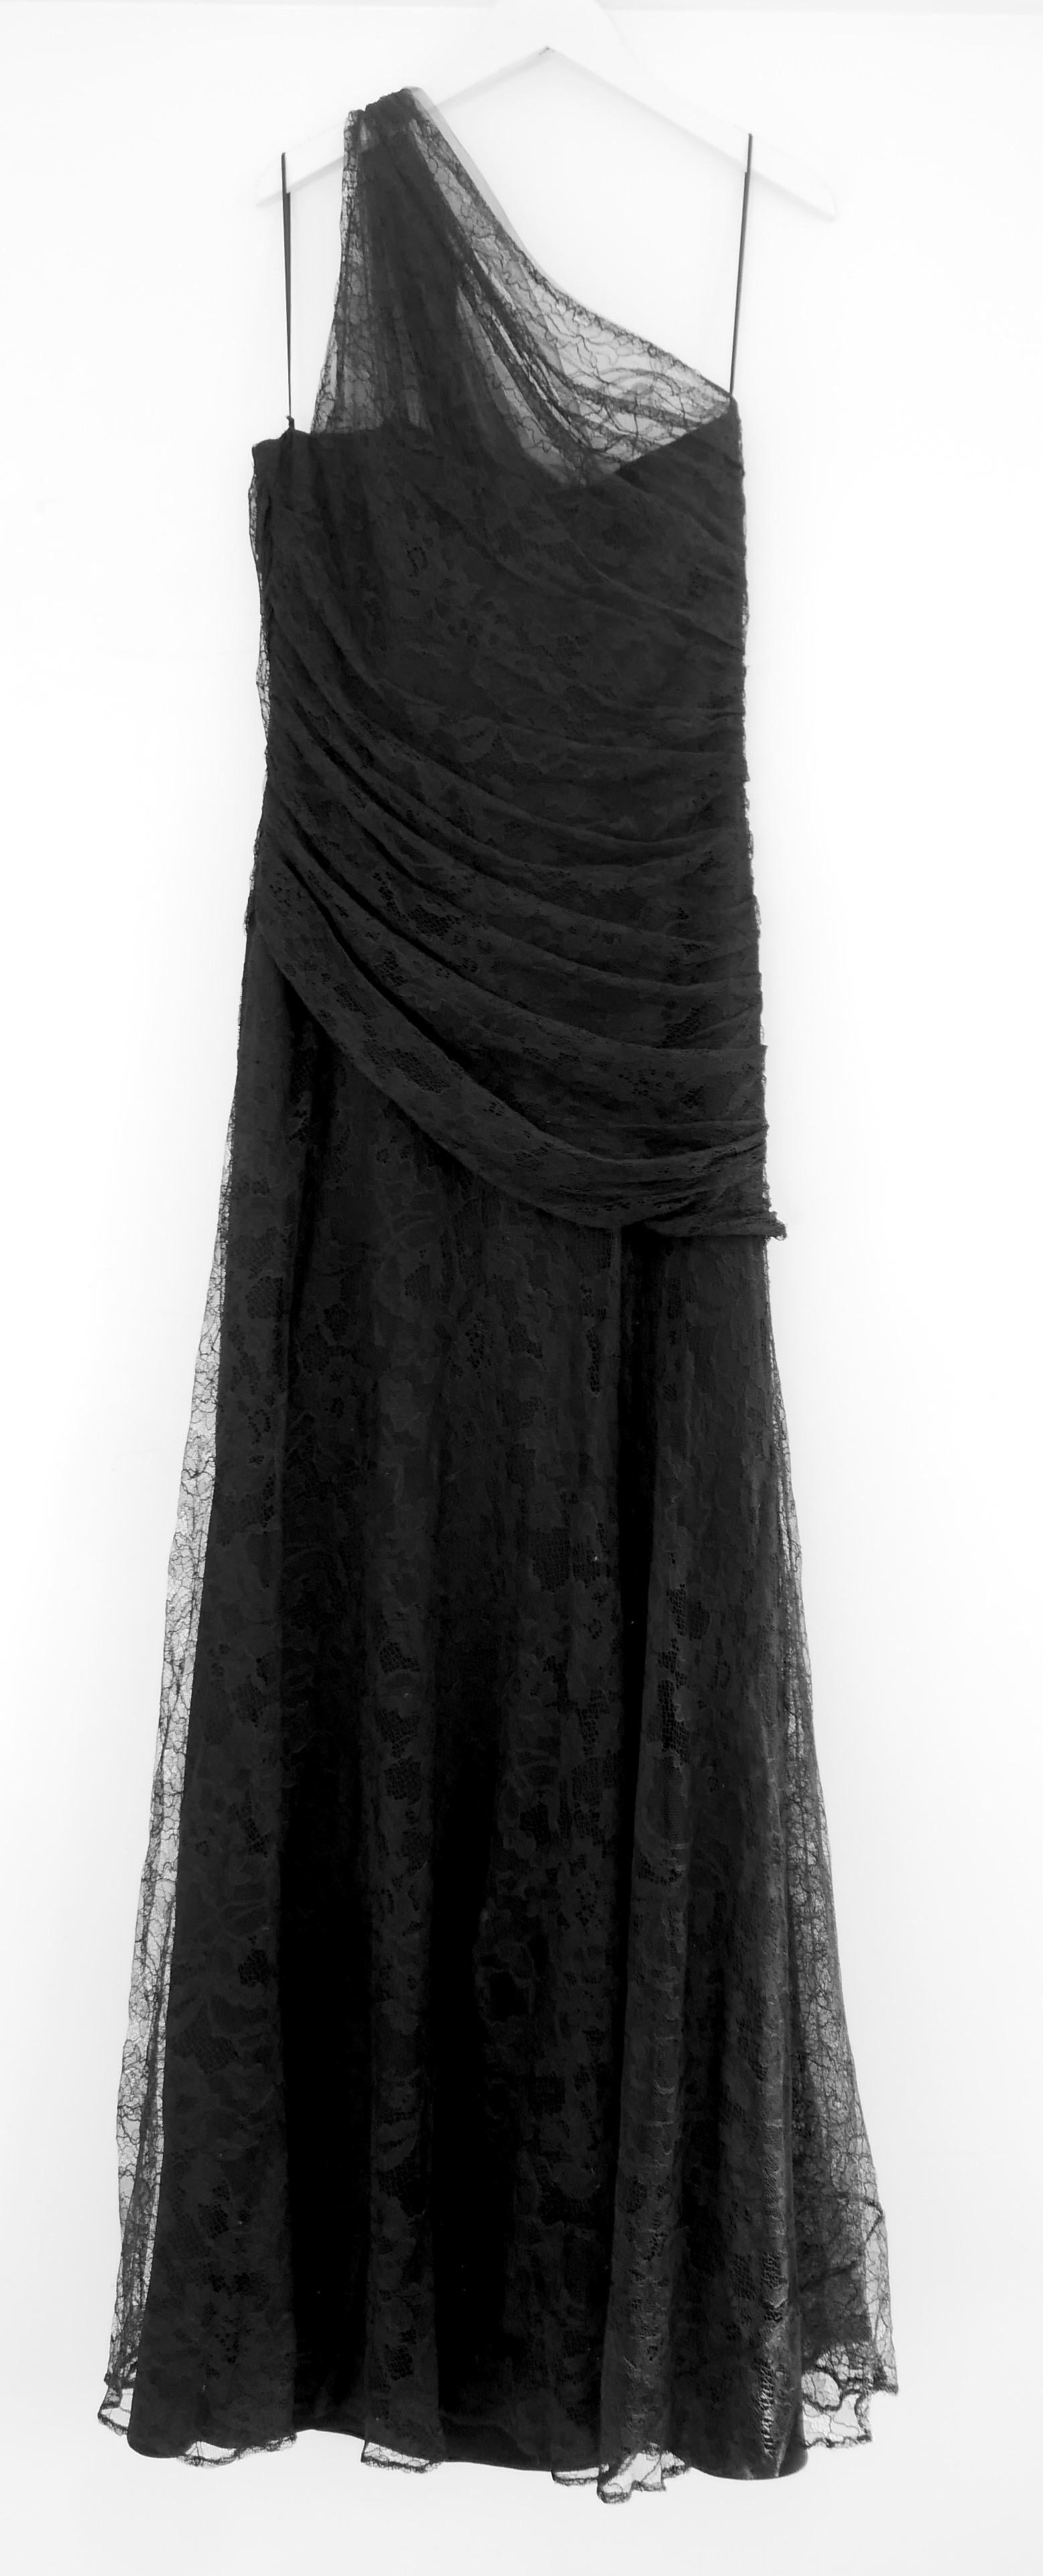 Gothic gorgeous Roberto Cavalli one shoulder lace gown. Bought for £2540 and new with tags, hanger and dustbag. Made from super fine, delicate slightly sparkling black lace, it has a super flattering boned and draped bodice, fluid maxi skirt and